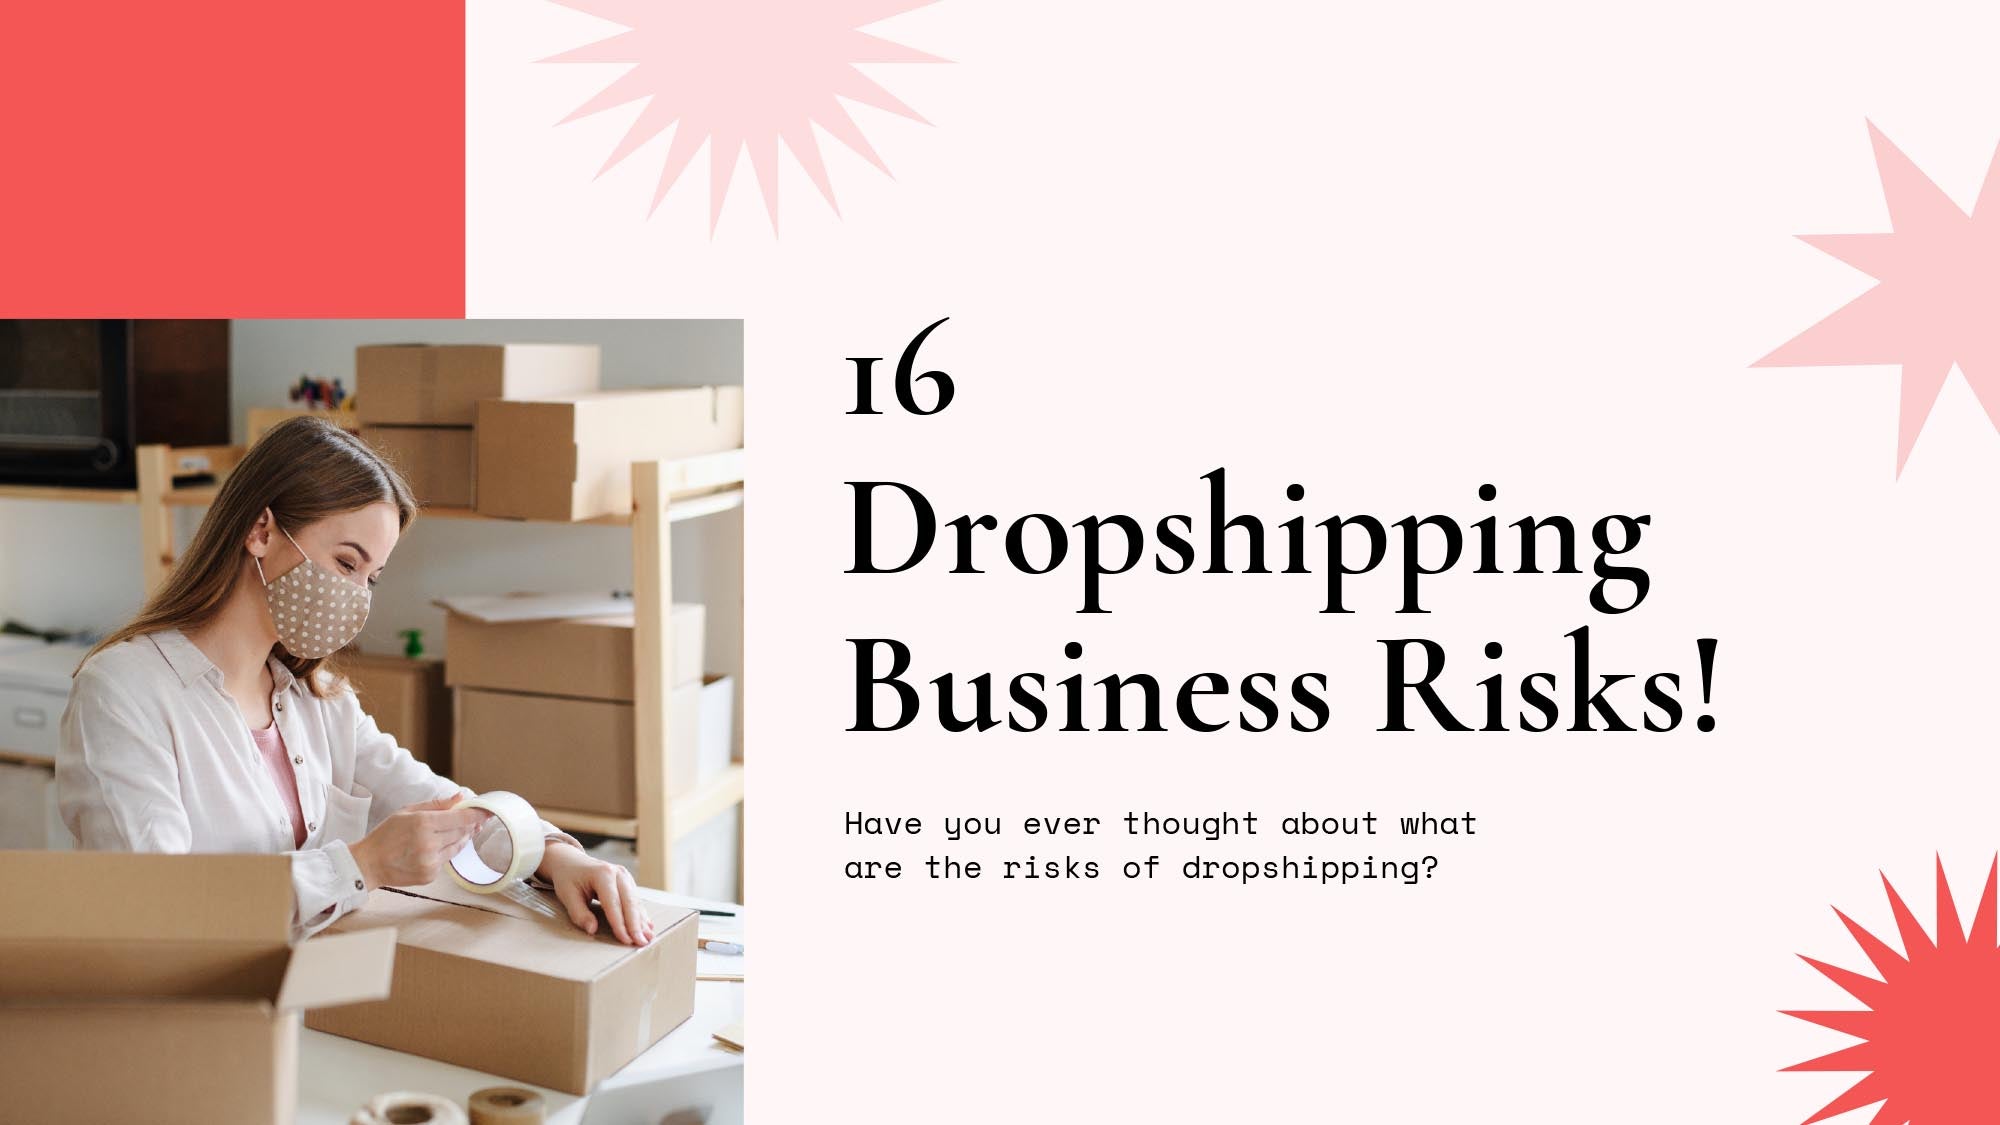 16 Dropshipping Business Risks and How to Manage Them